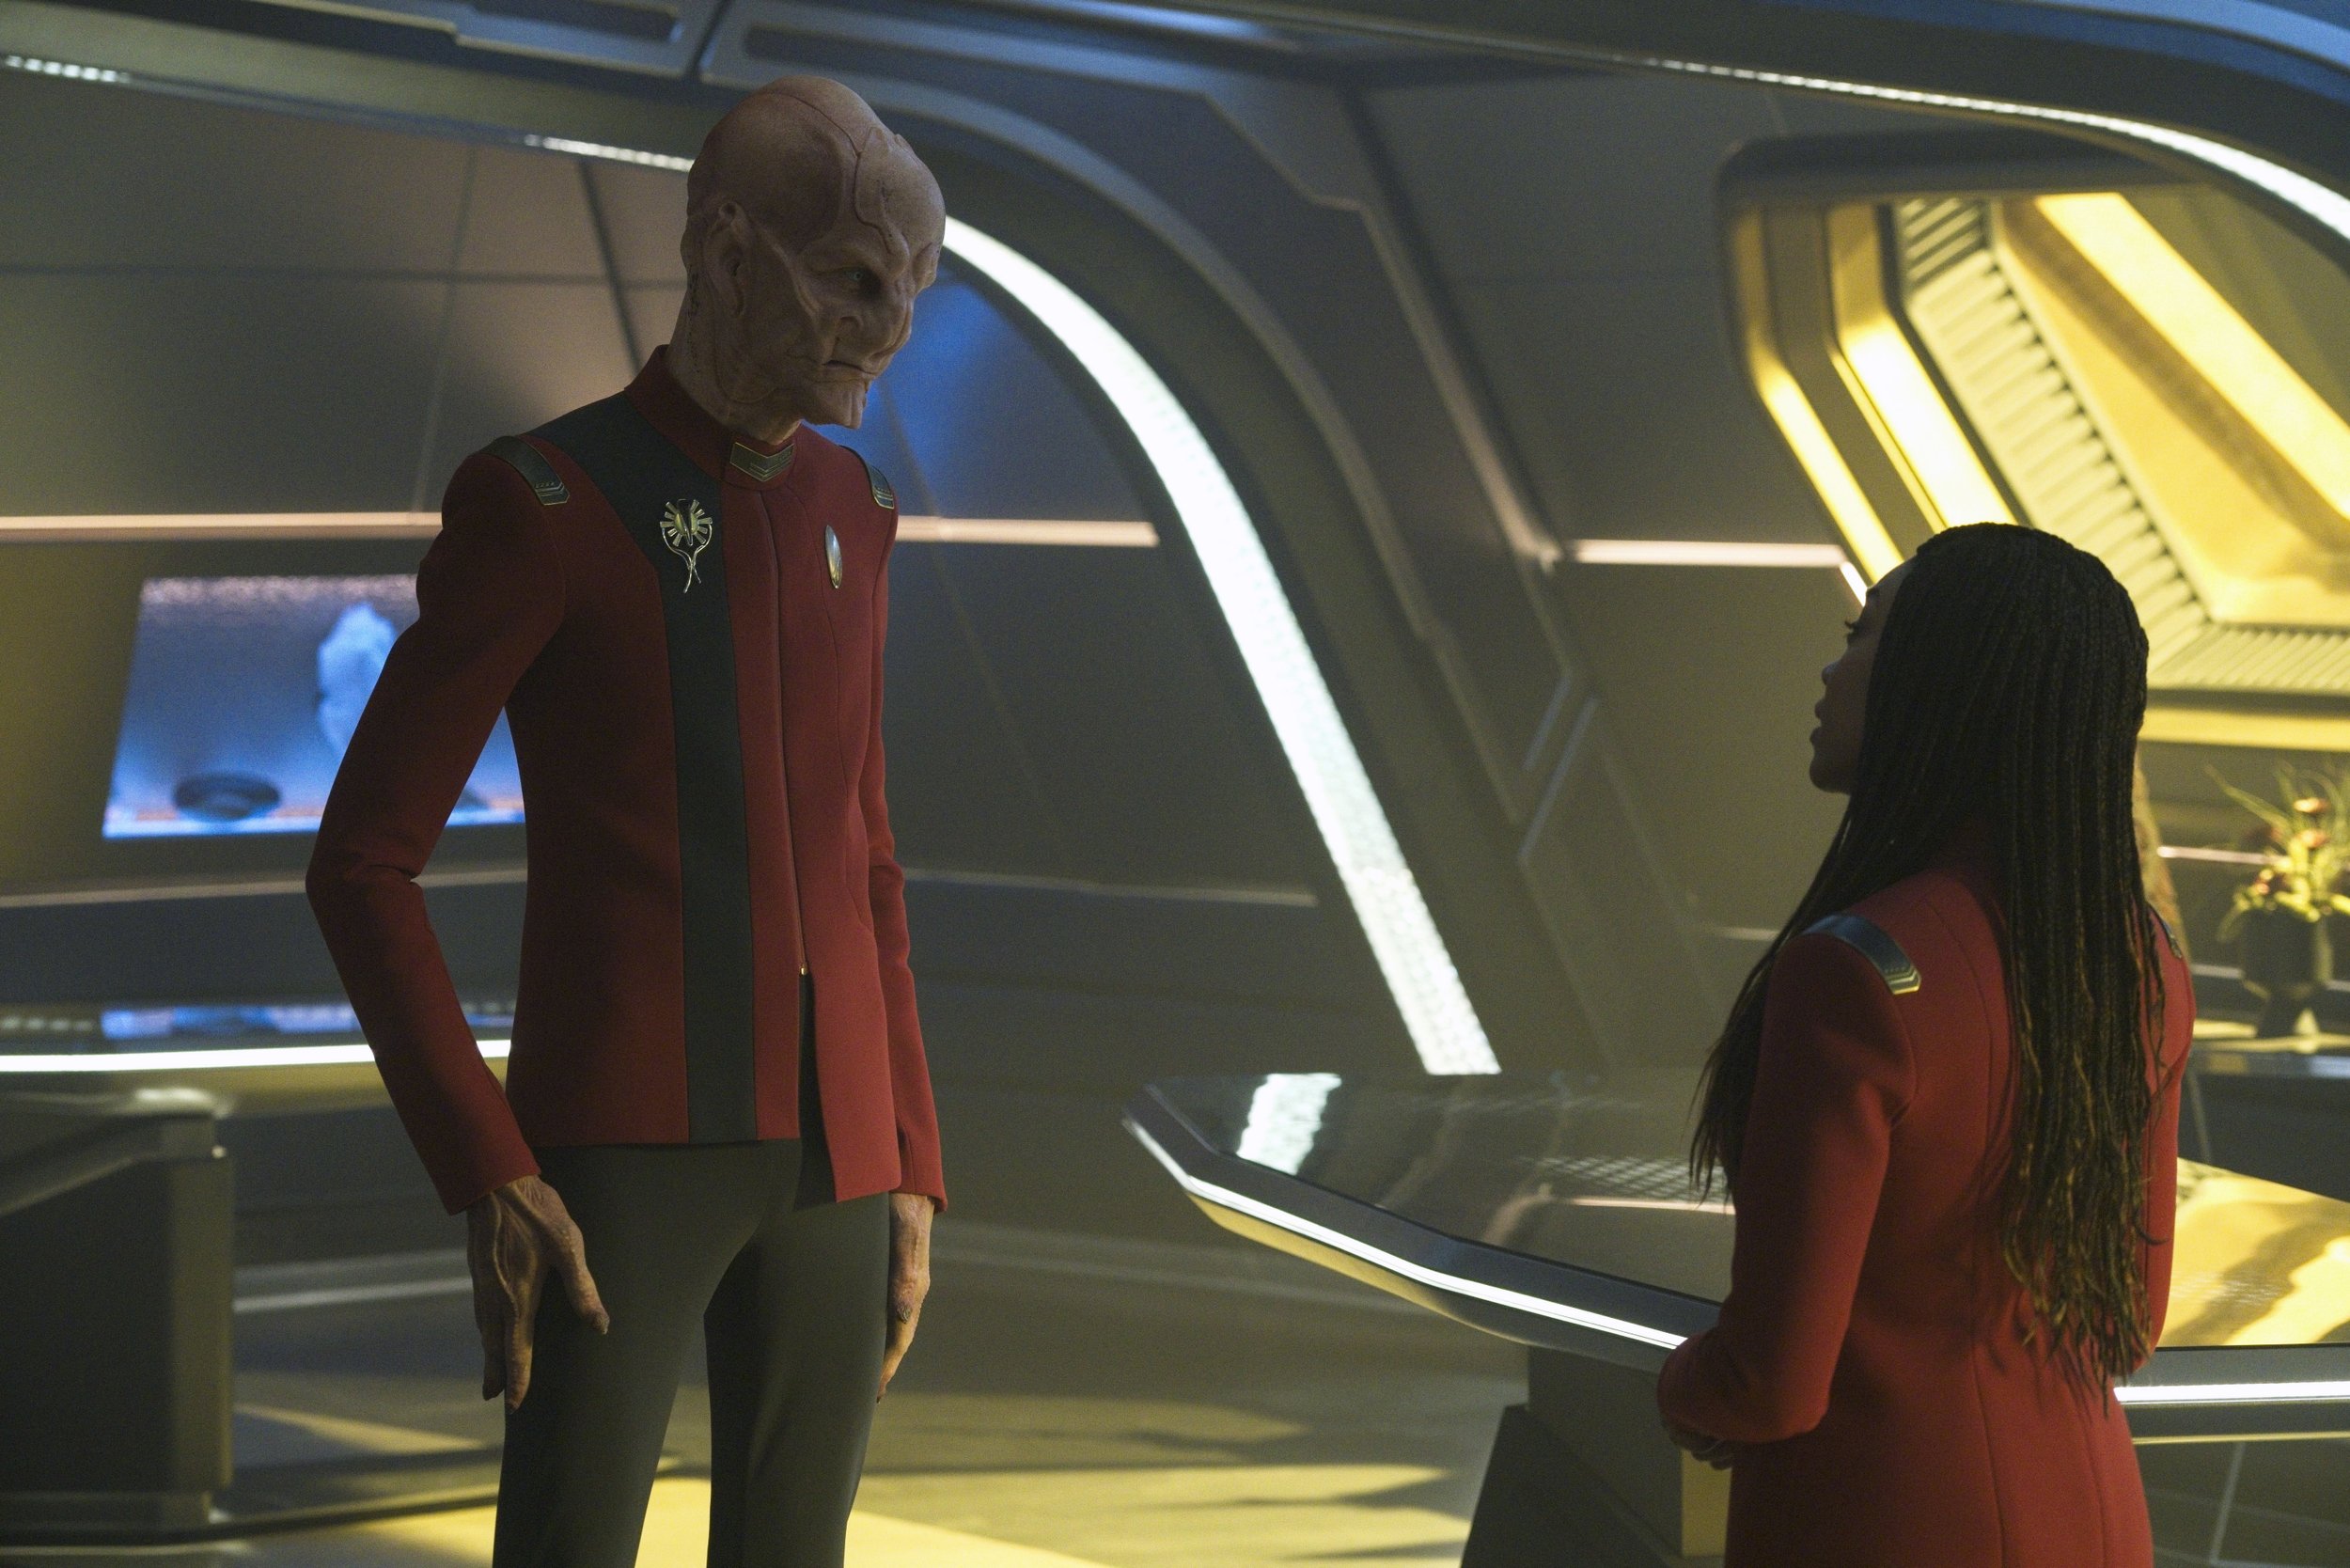   Pictured: Doug Jones as Saru and Sonequa Martin Green as Burnham of the Paramount+ original series STAR TREK: DISCOVERY. Photo Cr: Michael Gibson/Paramount+ © 2021 CBS Interactive. All Rights Reserved.  